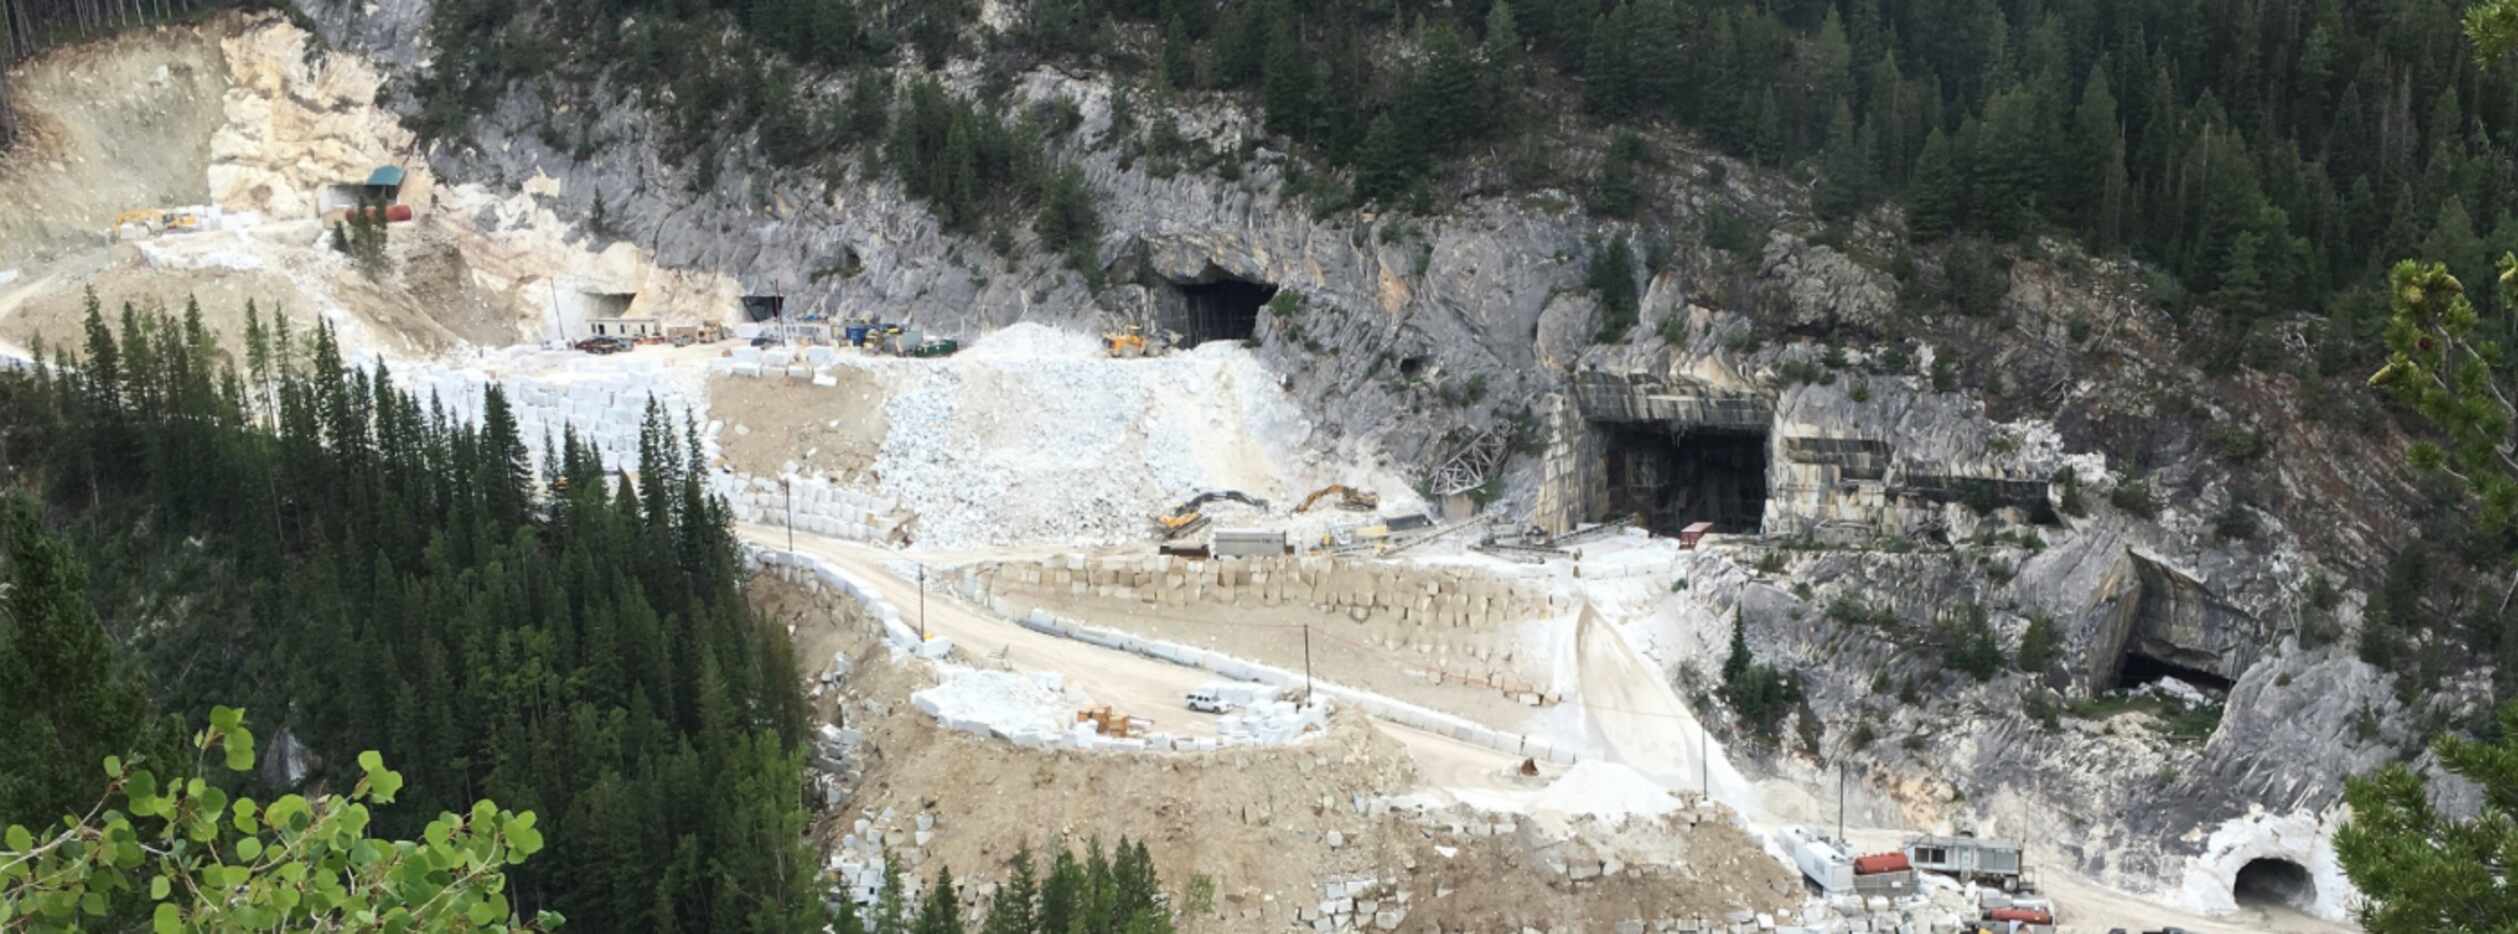 The Yule Marble Quarry near Crested Butte was first operated in the 1800s.